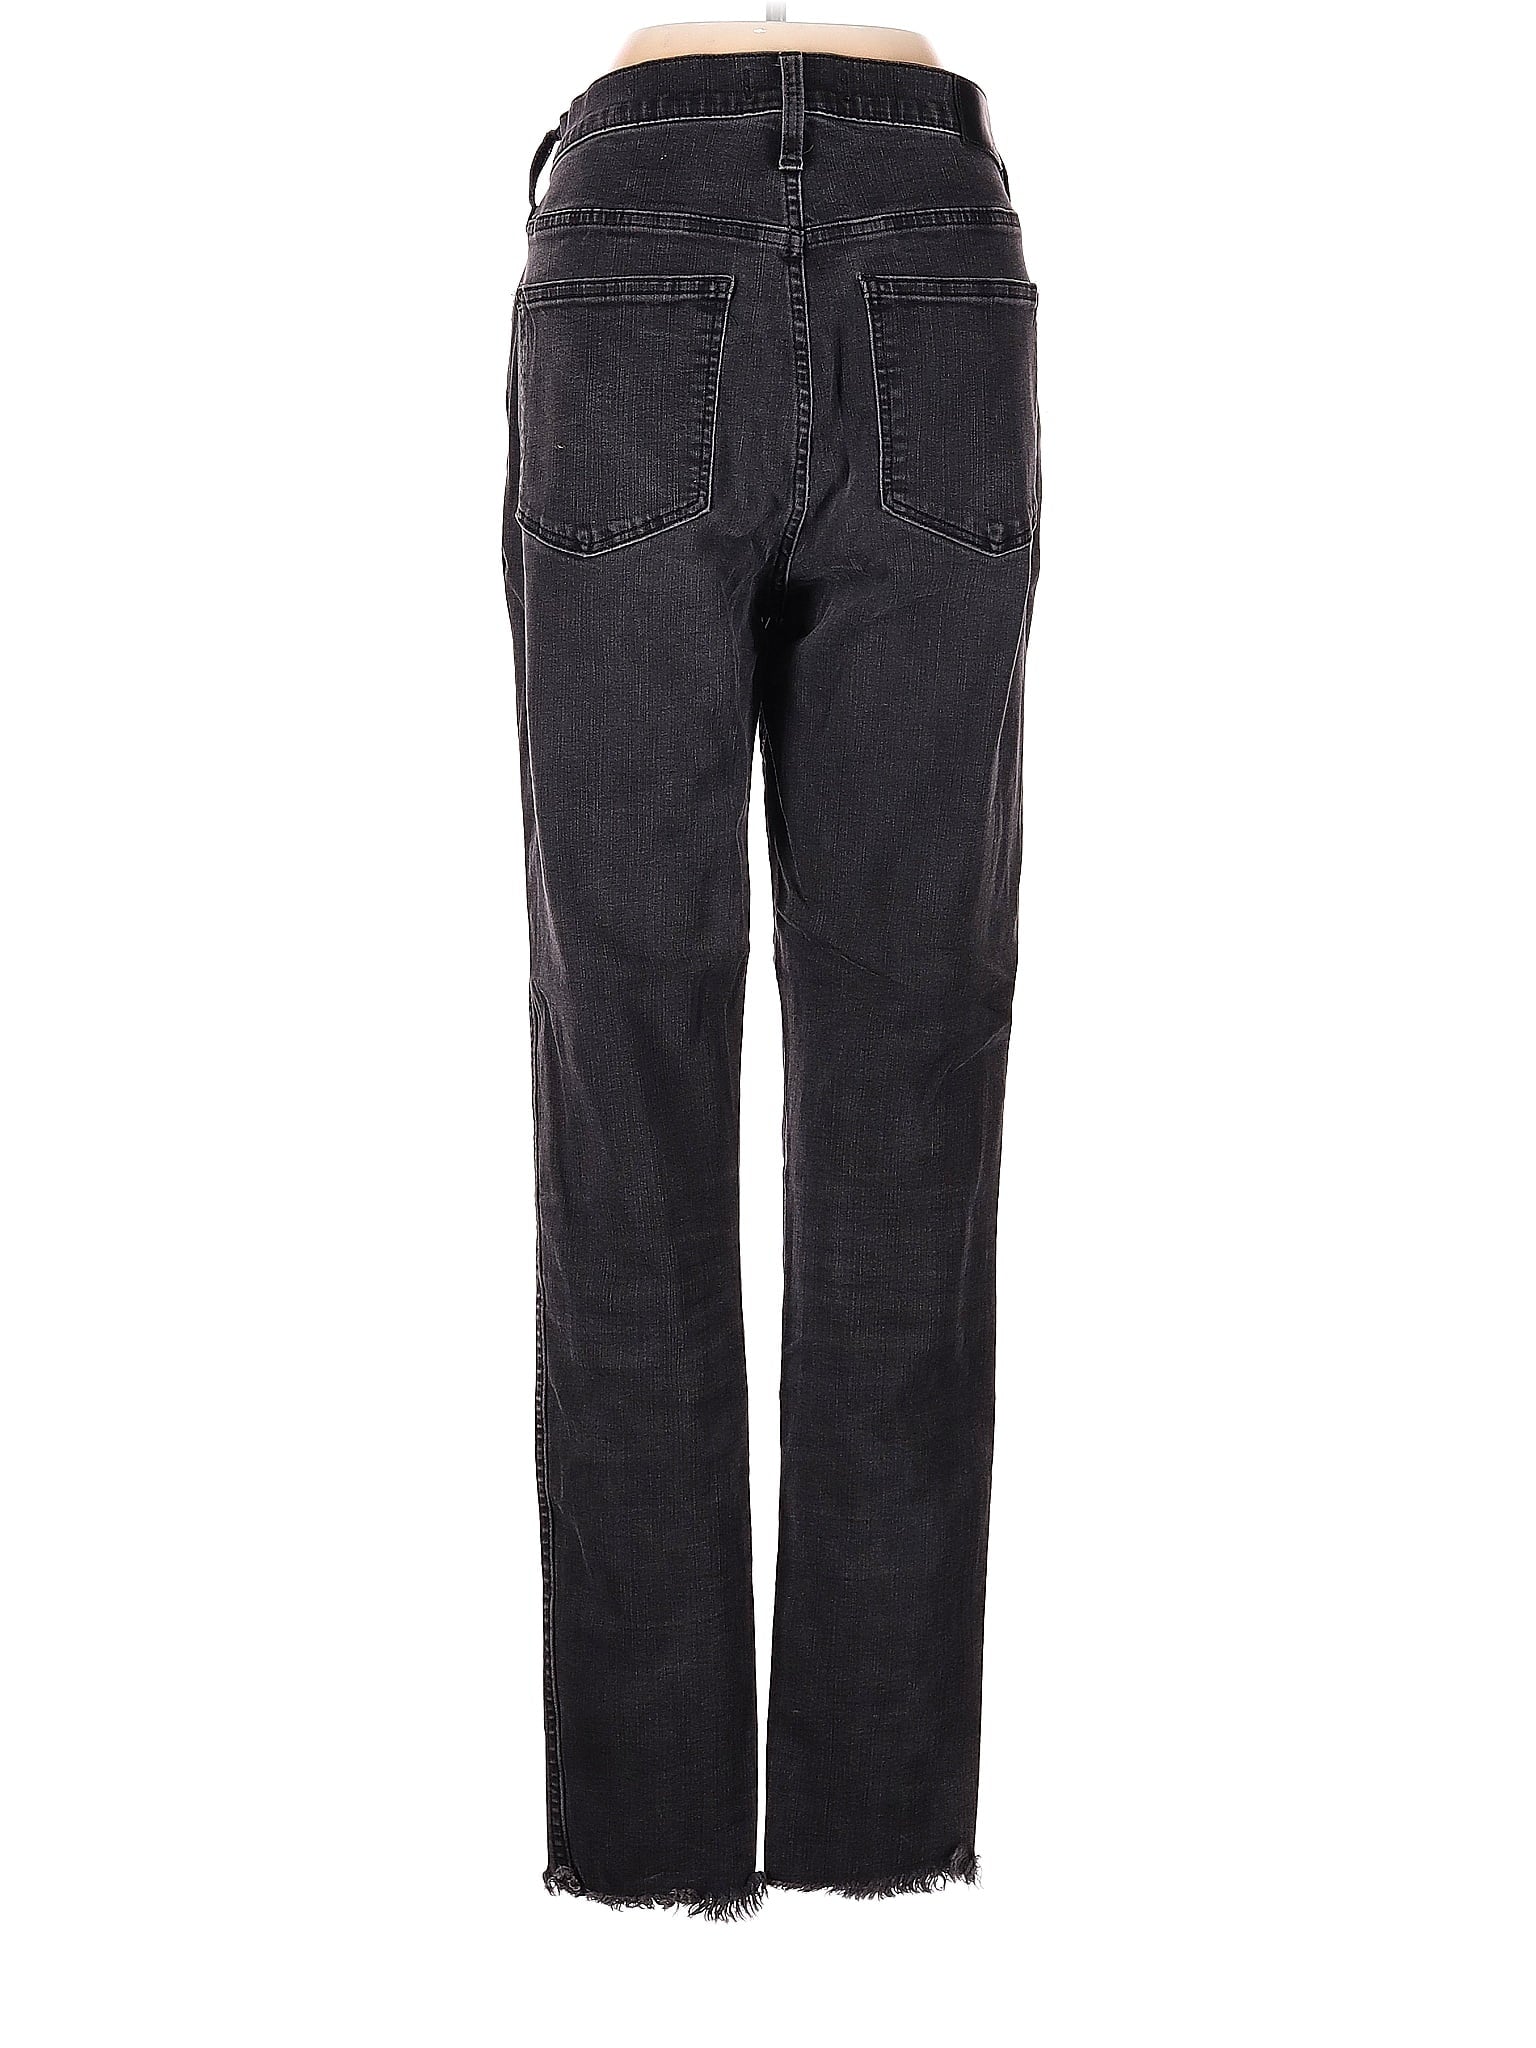 Mid-Rise Tall 10" High-Rise Skinny Jeans In Berkeley Black: Button-Through Edition waist size - 26 T